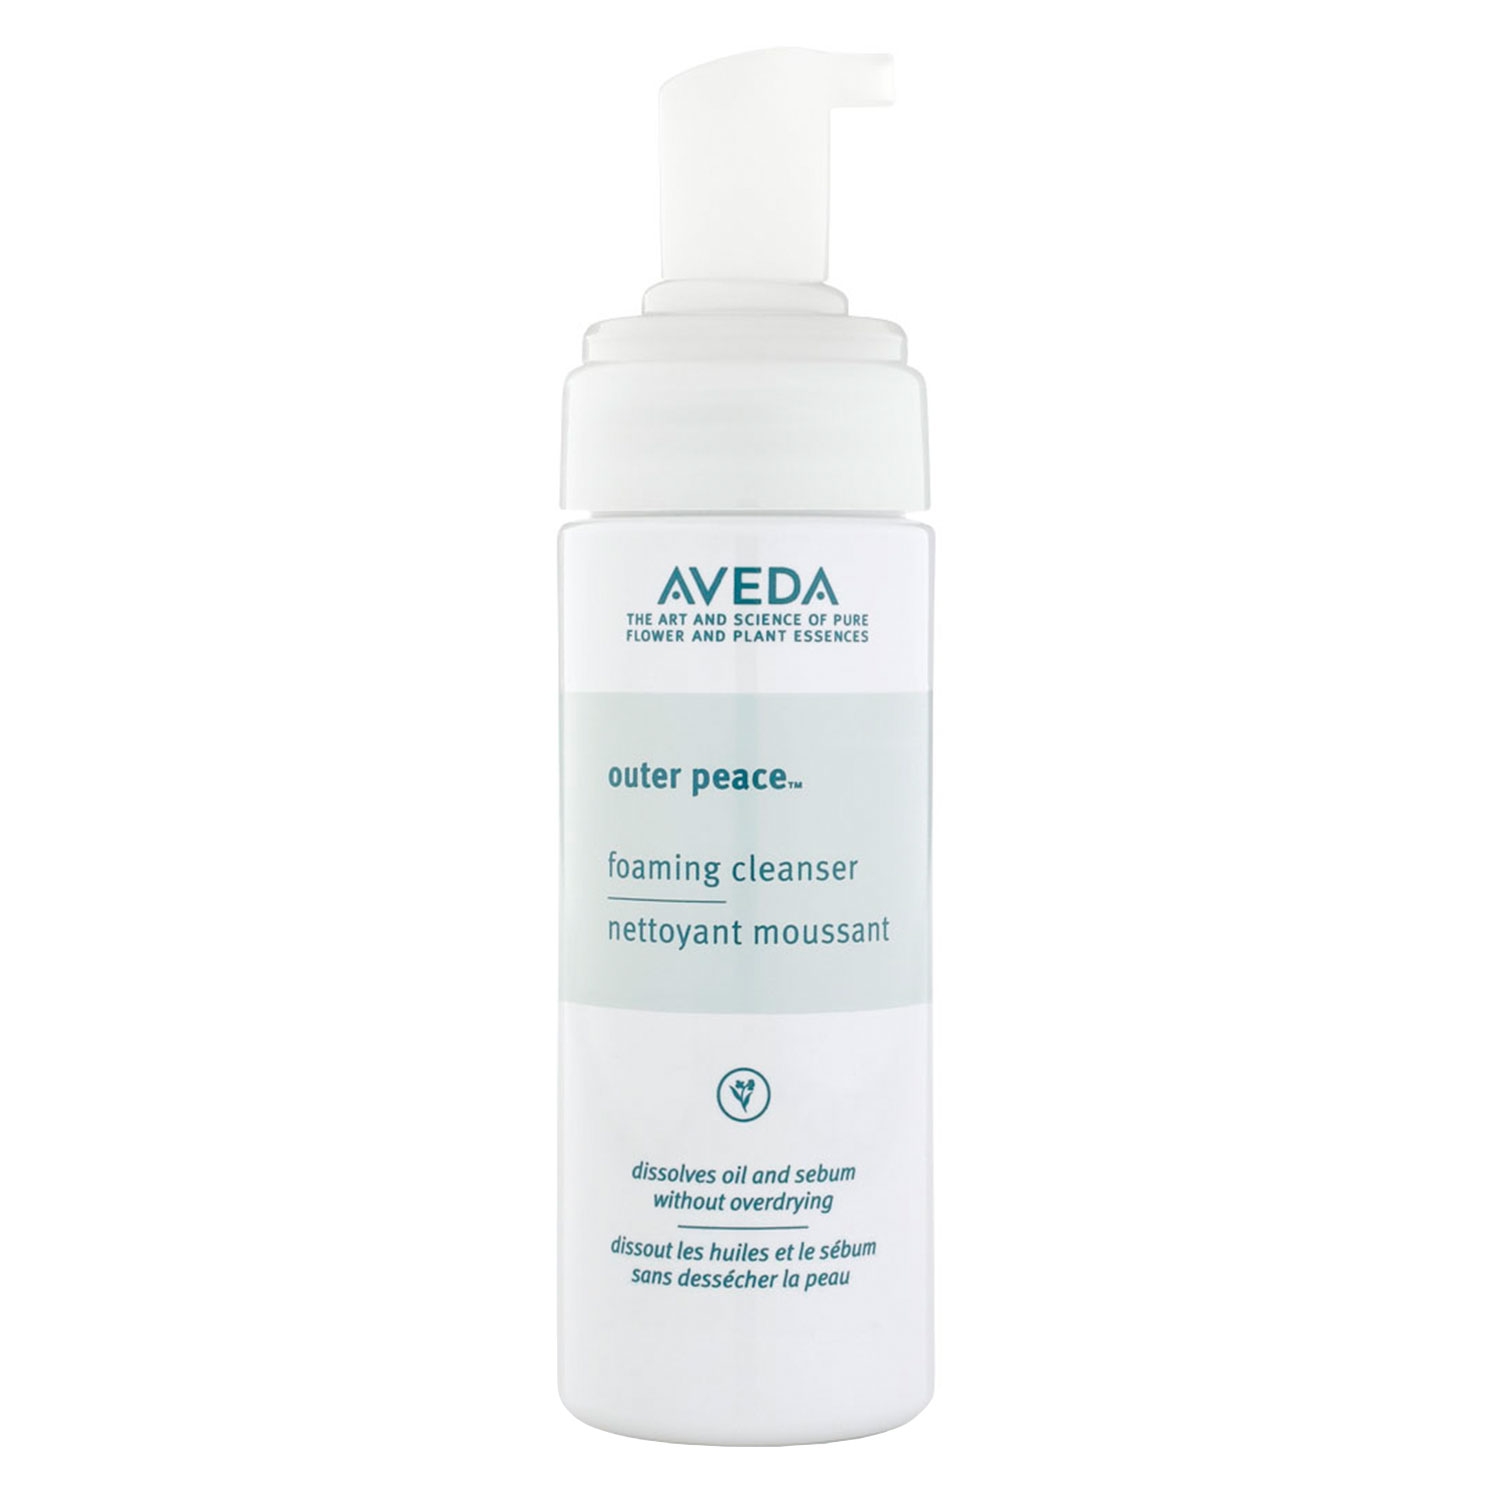 Product image from outer peace - foaming cleanser